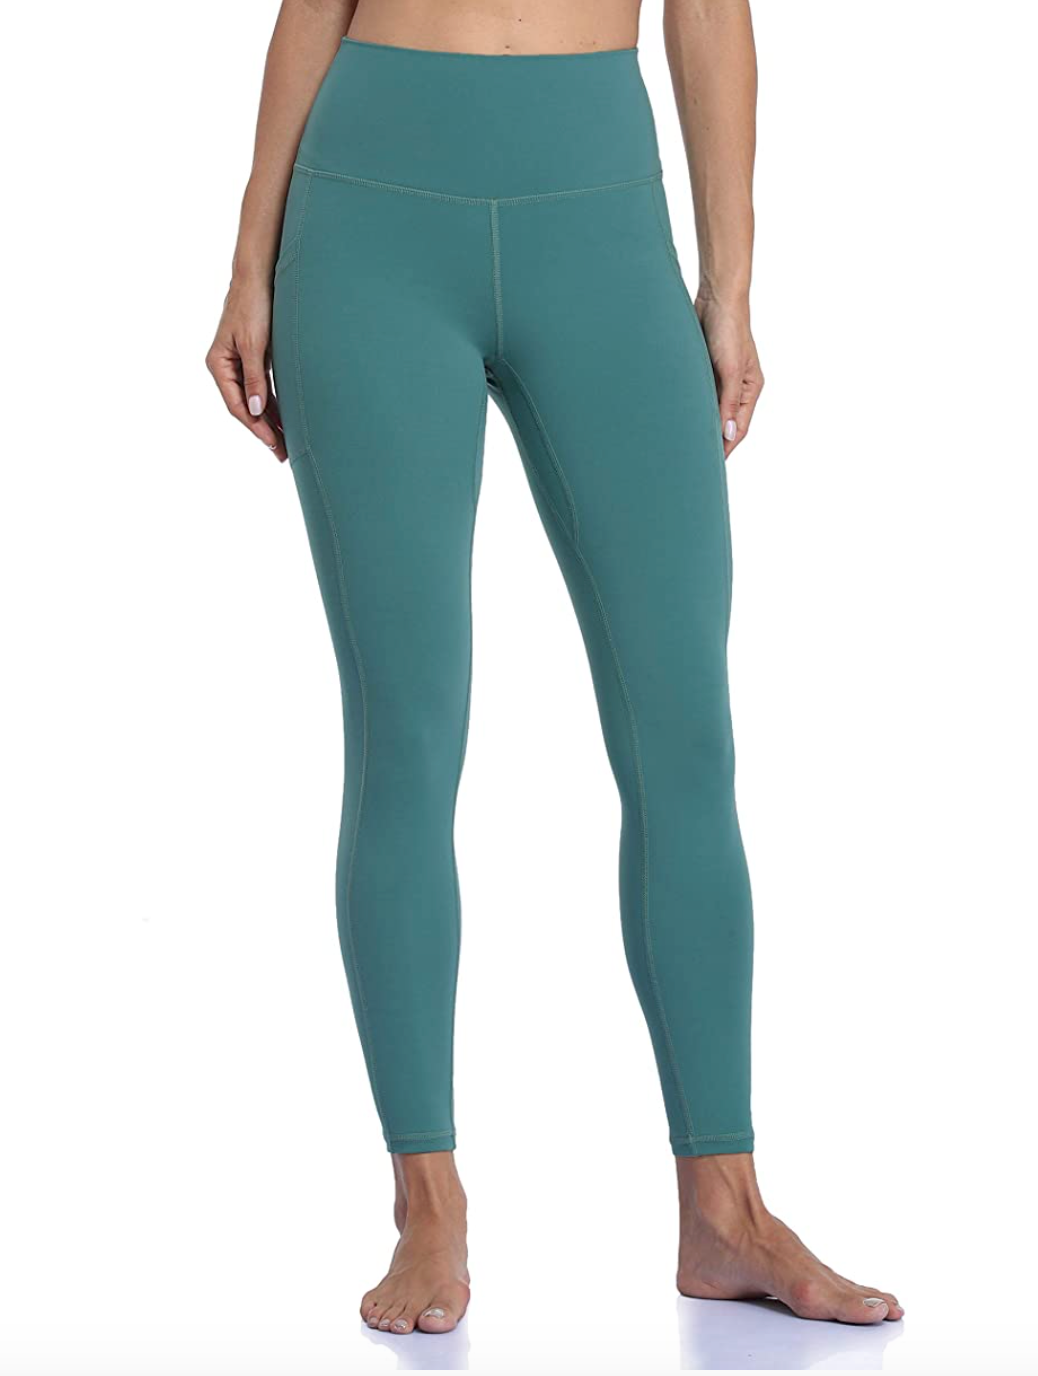  RAYPOSE Workout Leggings for Women with Pockets Tummy